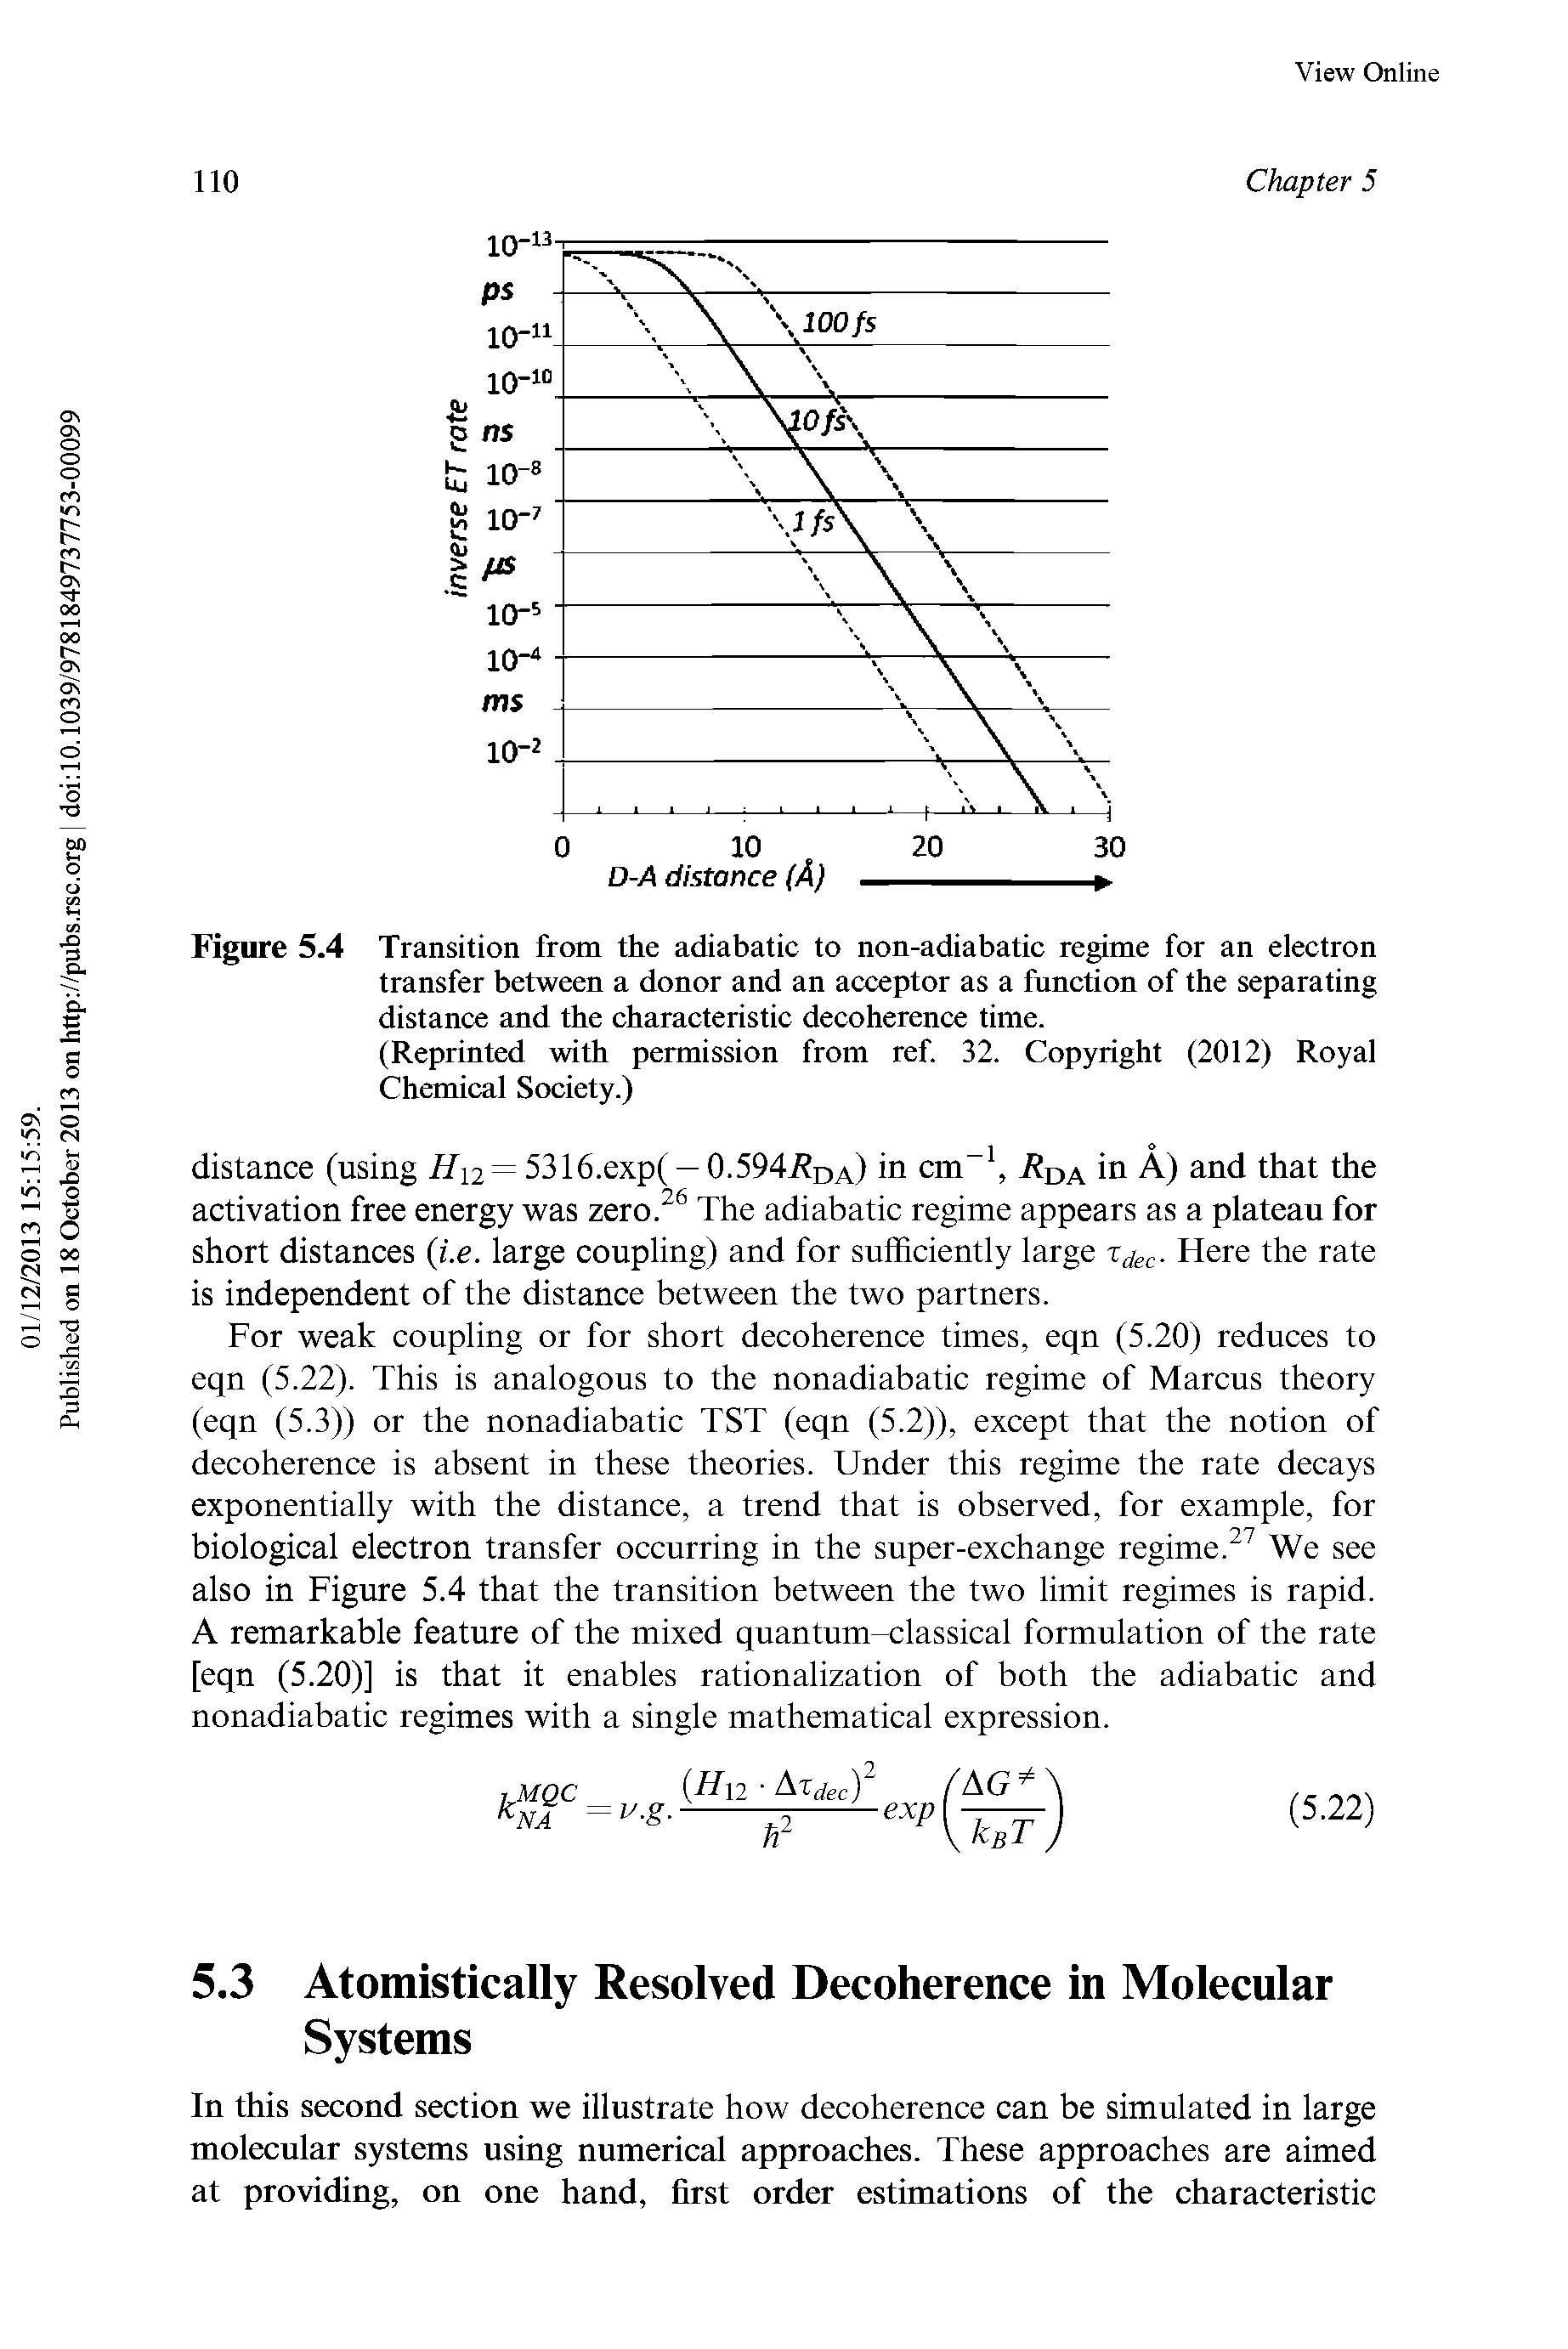 Figure 5.4 Transition from the adiabatic to non-adiabatic regime for an electron transfer between a donor and an acceptor as a function of the separating distance and the characteristic decoherence time.